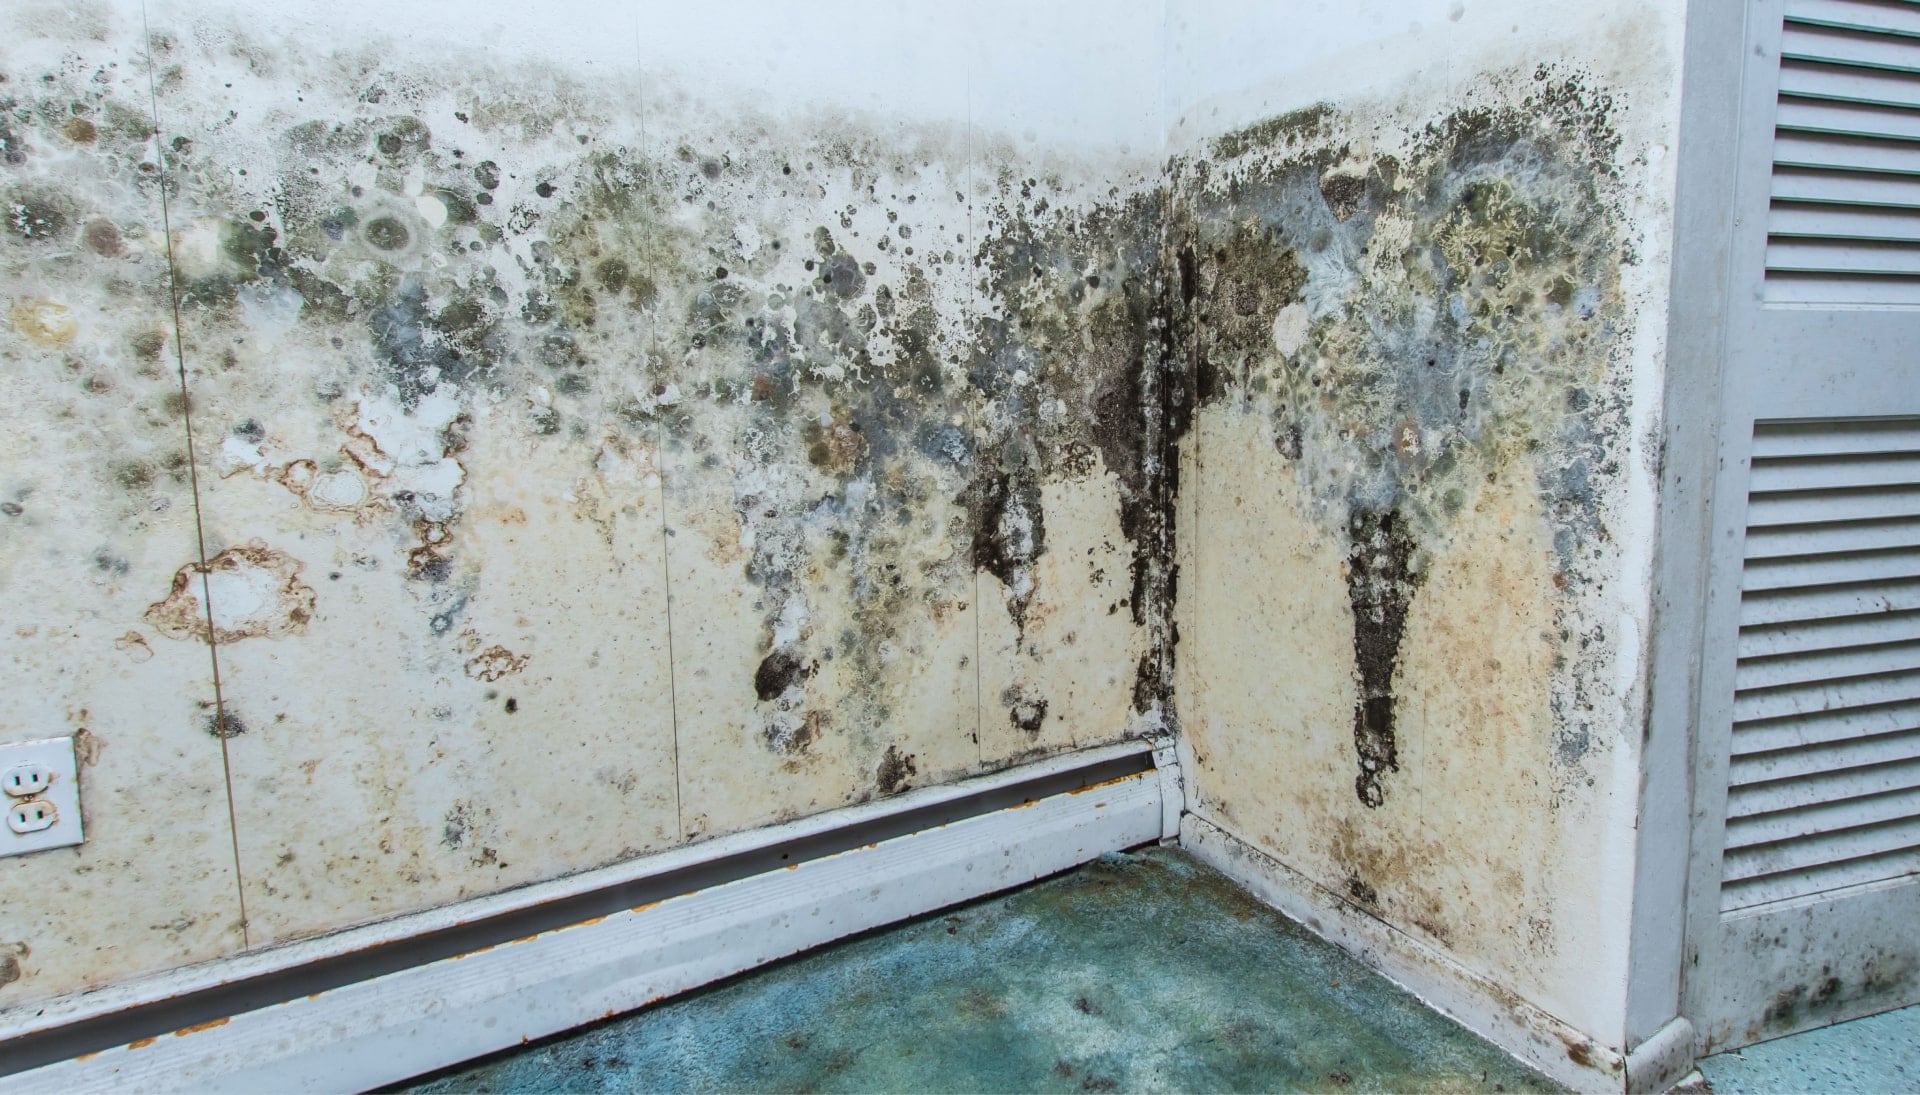 Professional mold removal, odor control, and water damage restoration service in Chesapeake, Virginia.